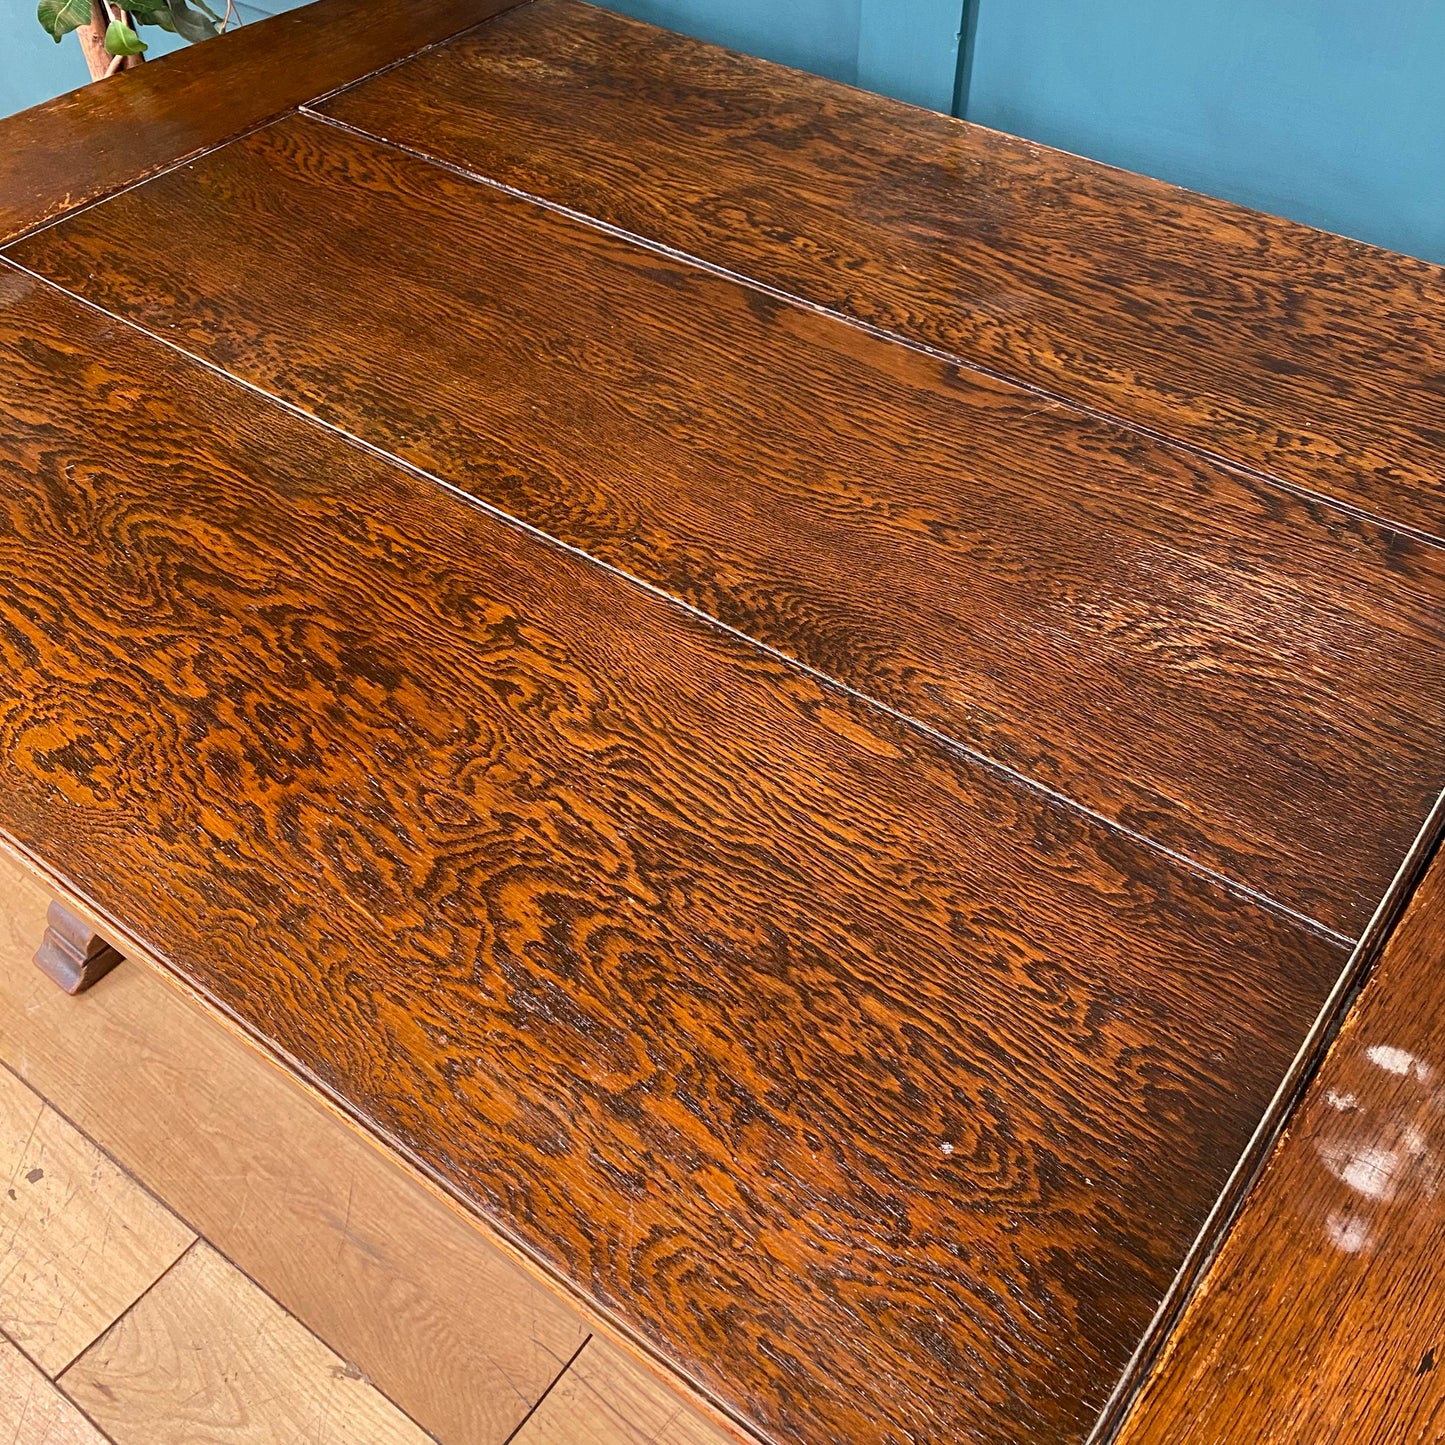 Antique Solid Oak Dining Table / Metamorphic Sofa Table / 1920s  Oak Table